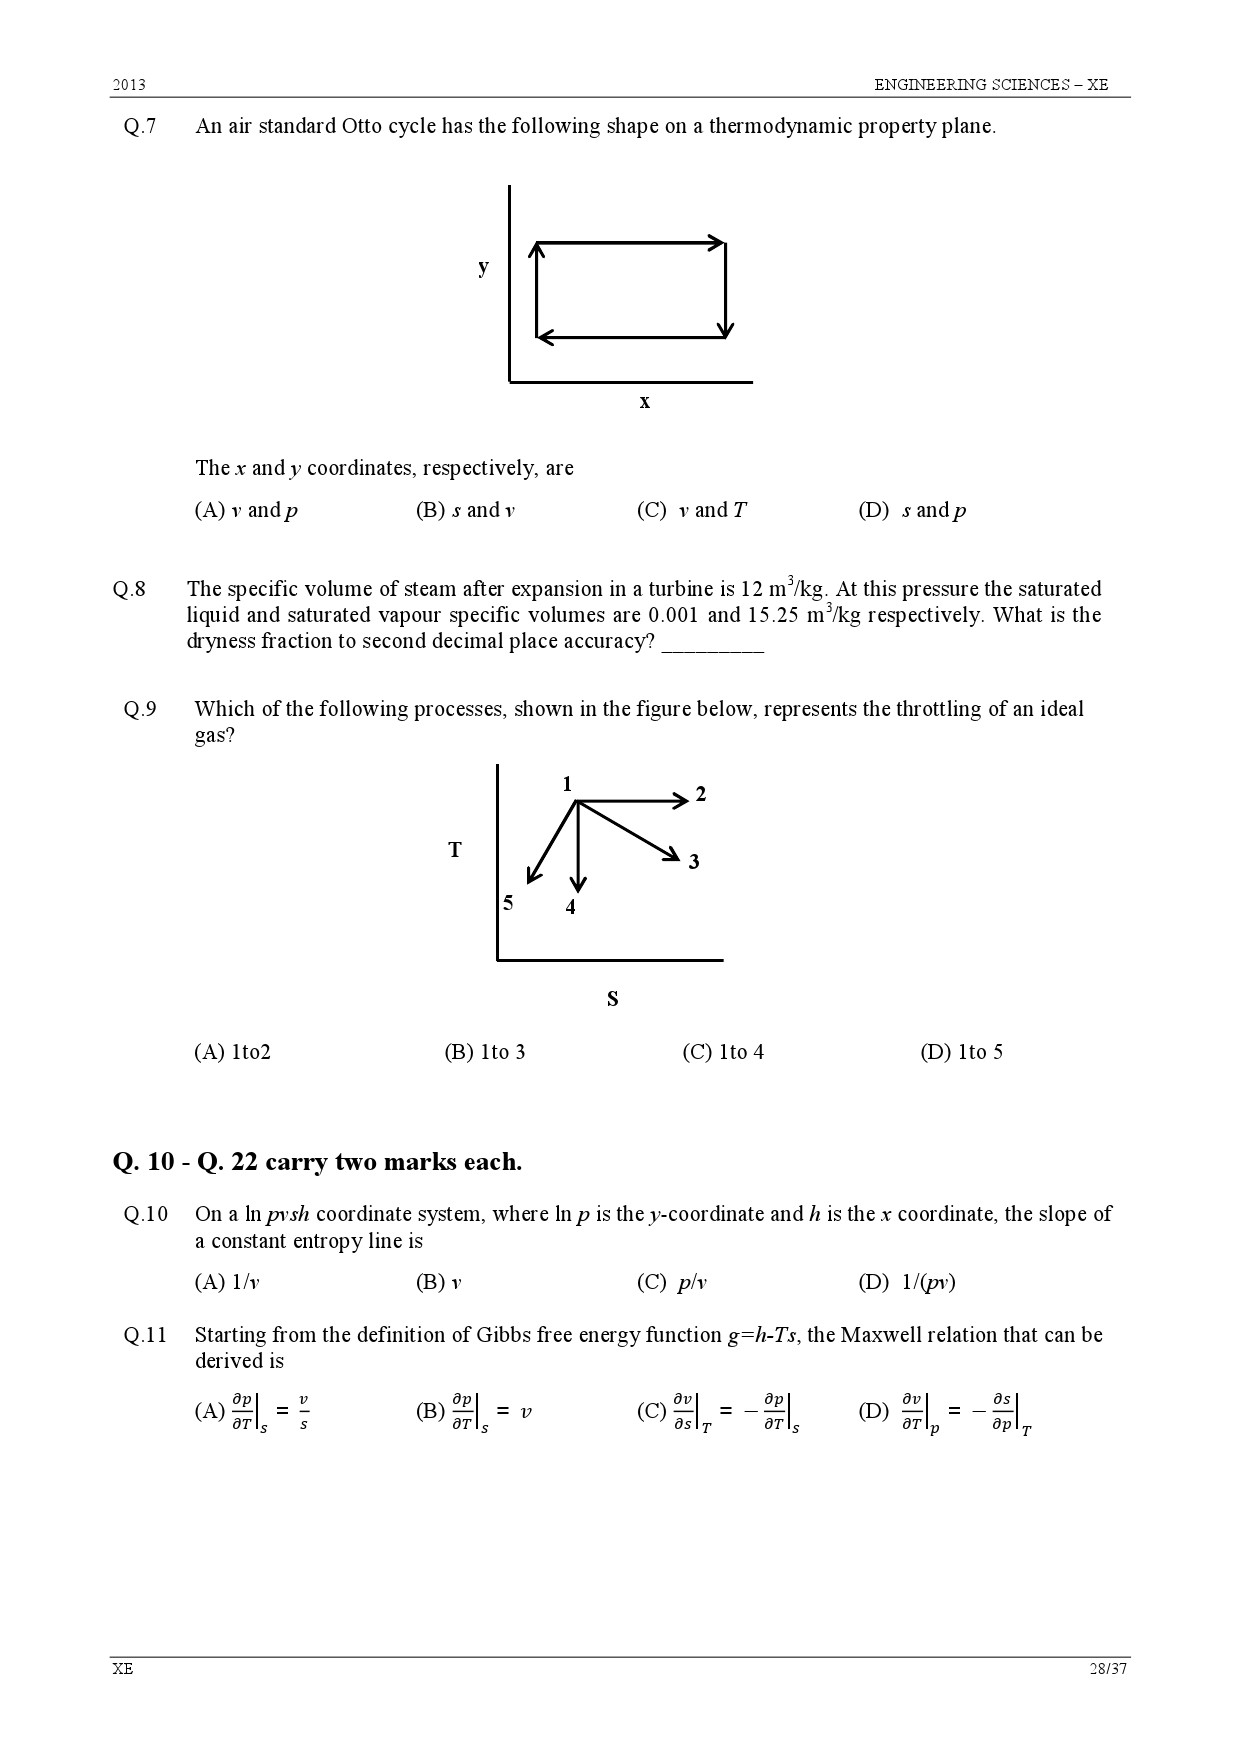 GATE Exam Question Paper 2013 Engineering Sciences 28